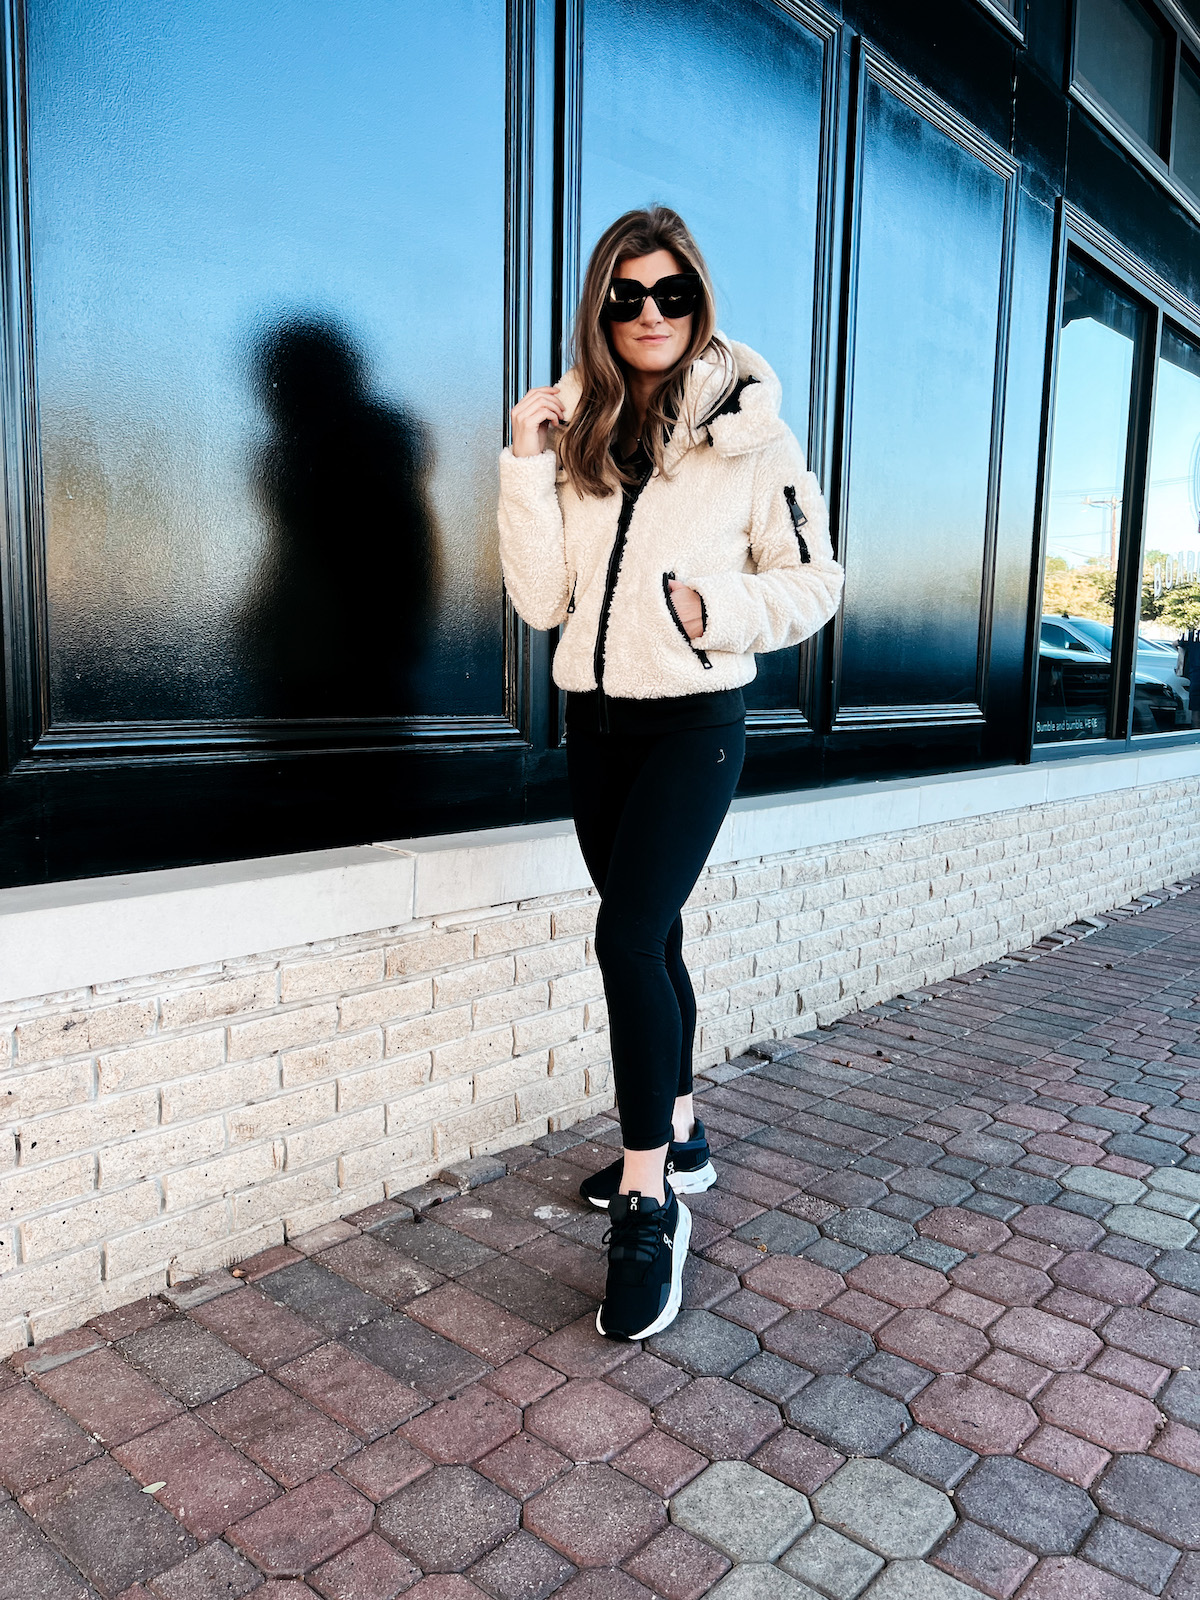 Brighton Butler wearing Backcountry sherpa jacket with black leggings and on cloud sneakers